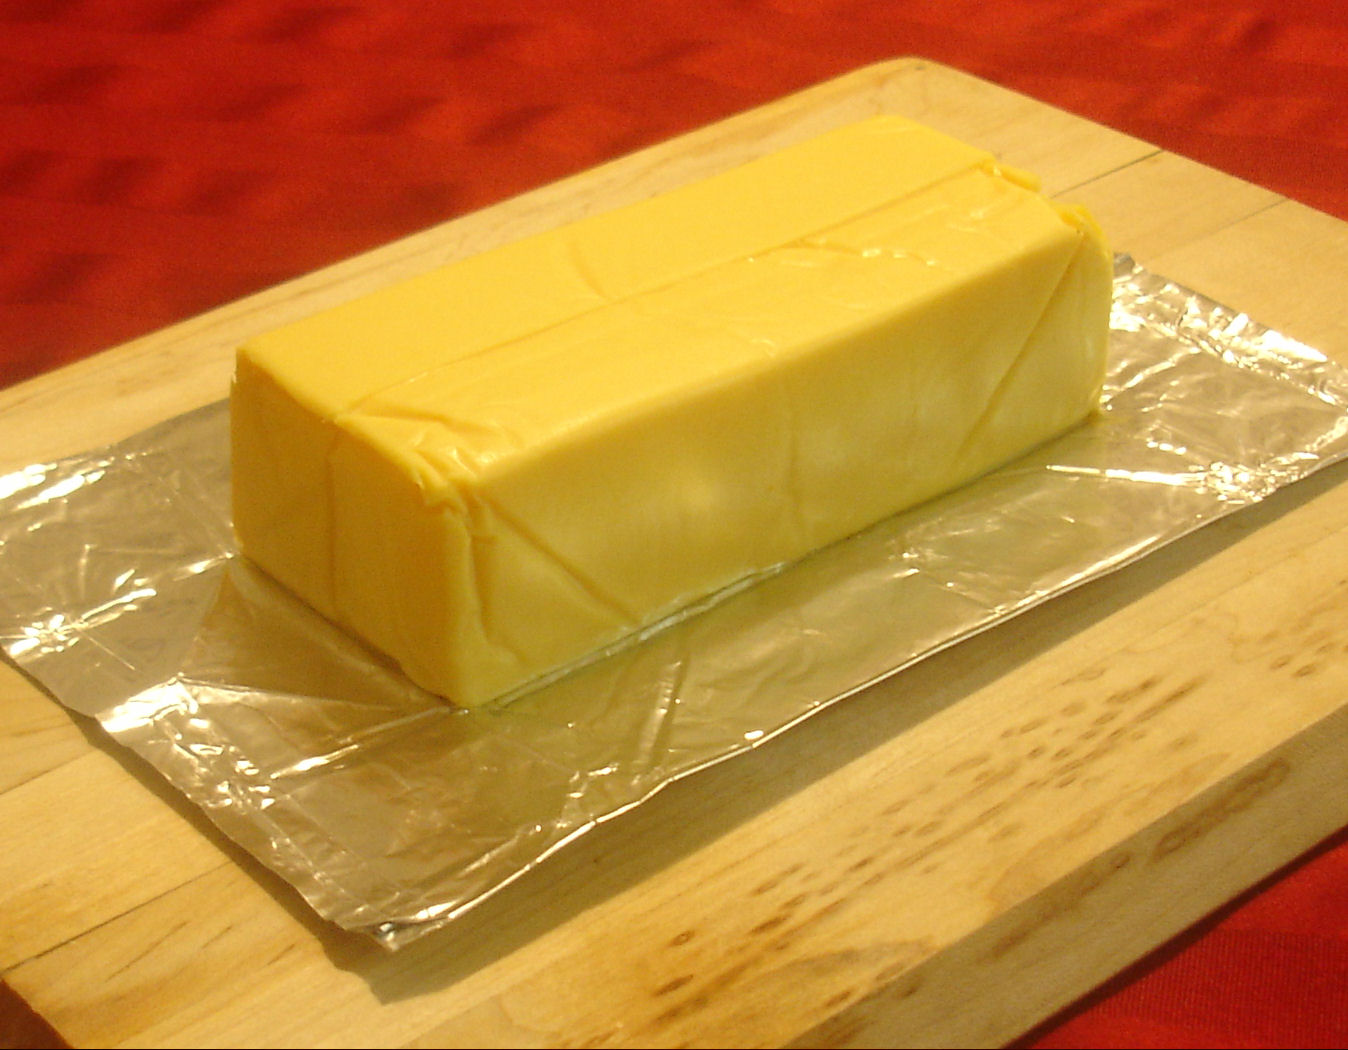 A block of cheese